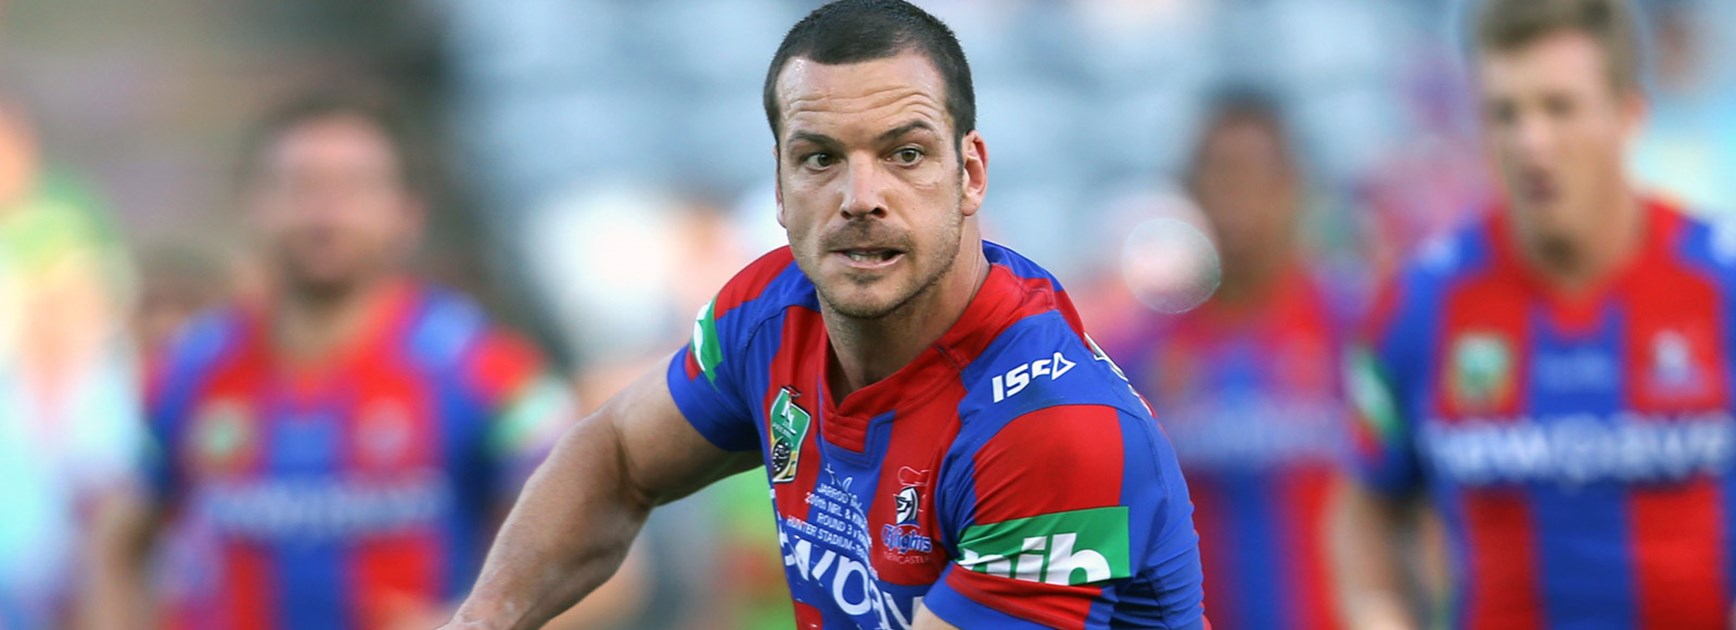 Knights five-eighth Jarrod Mullen in is 200th NRL game against the Raiders in Round 3.